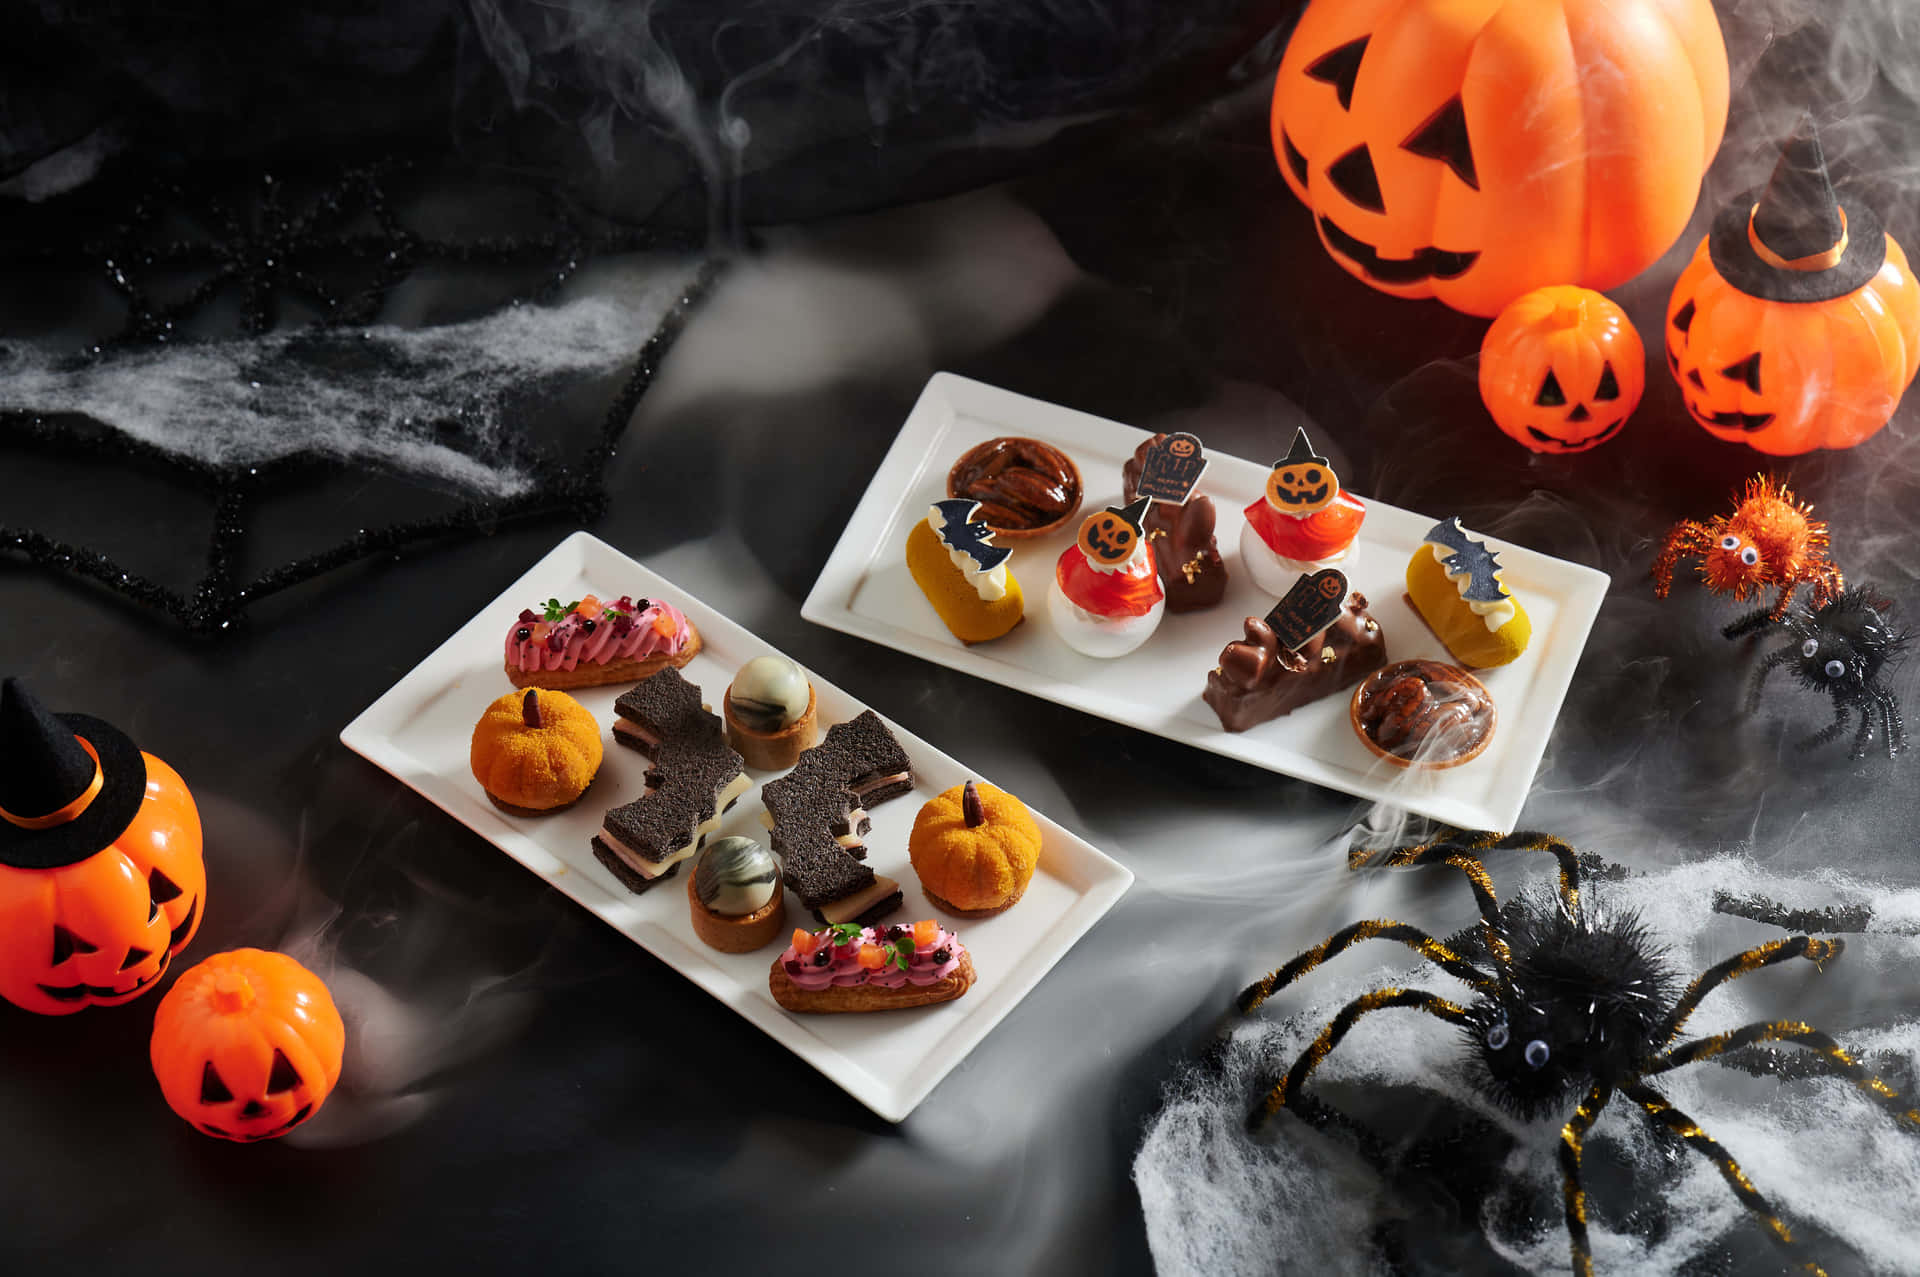 Get Ready for Halloween with a Delicious Treat! Wallpaper